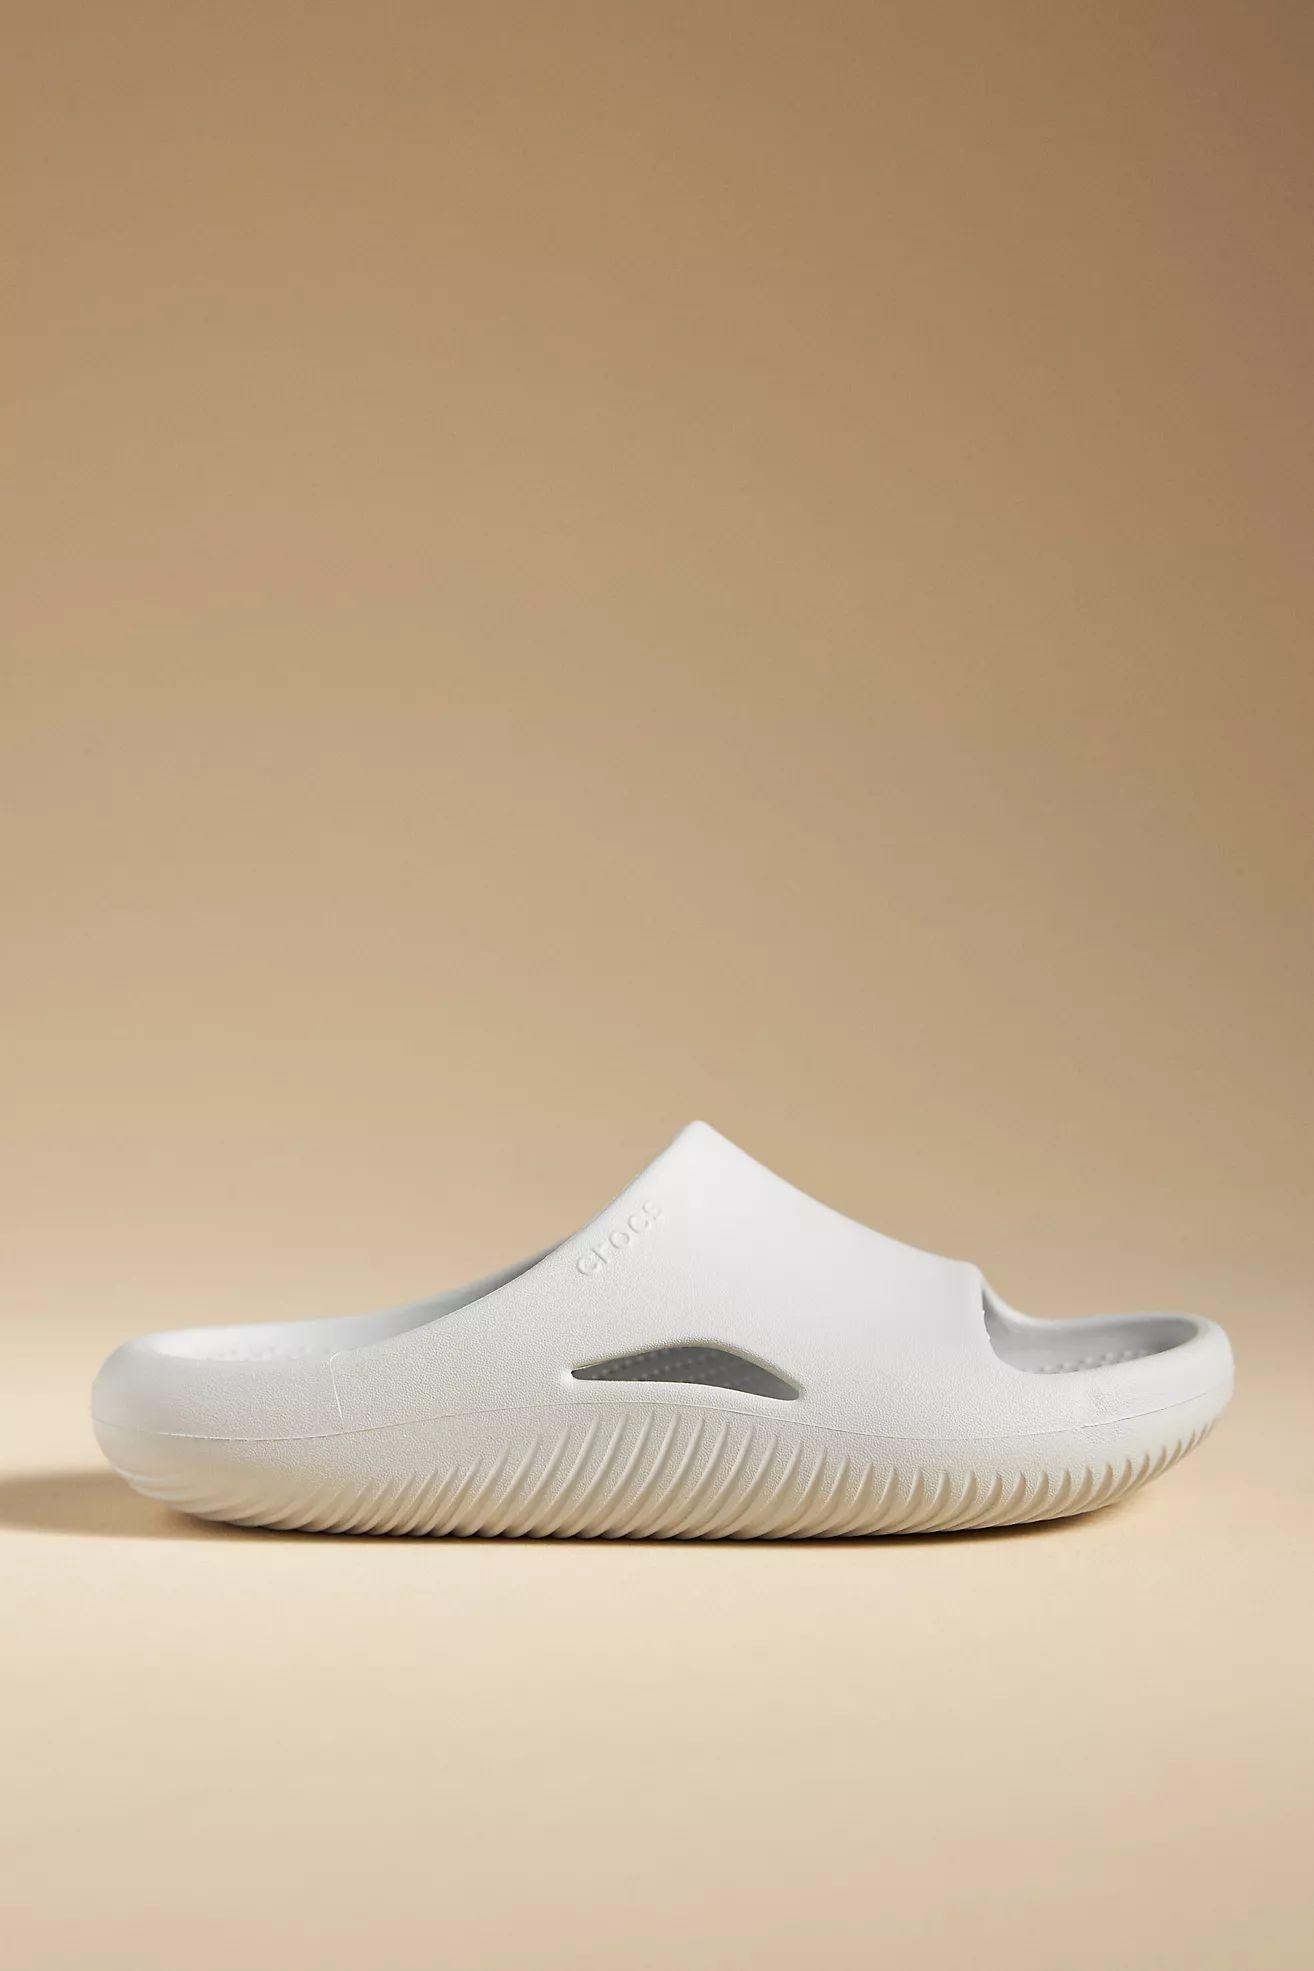 Crocs Recovery Slides | Anthropologie (US)